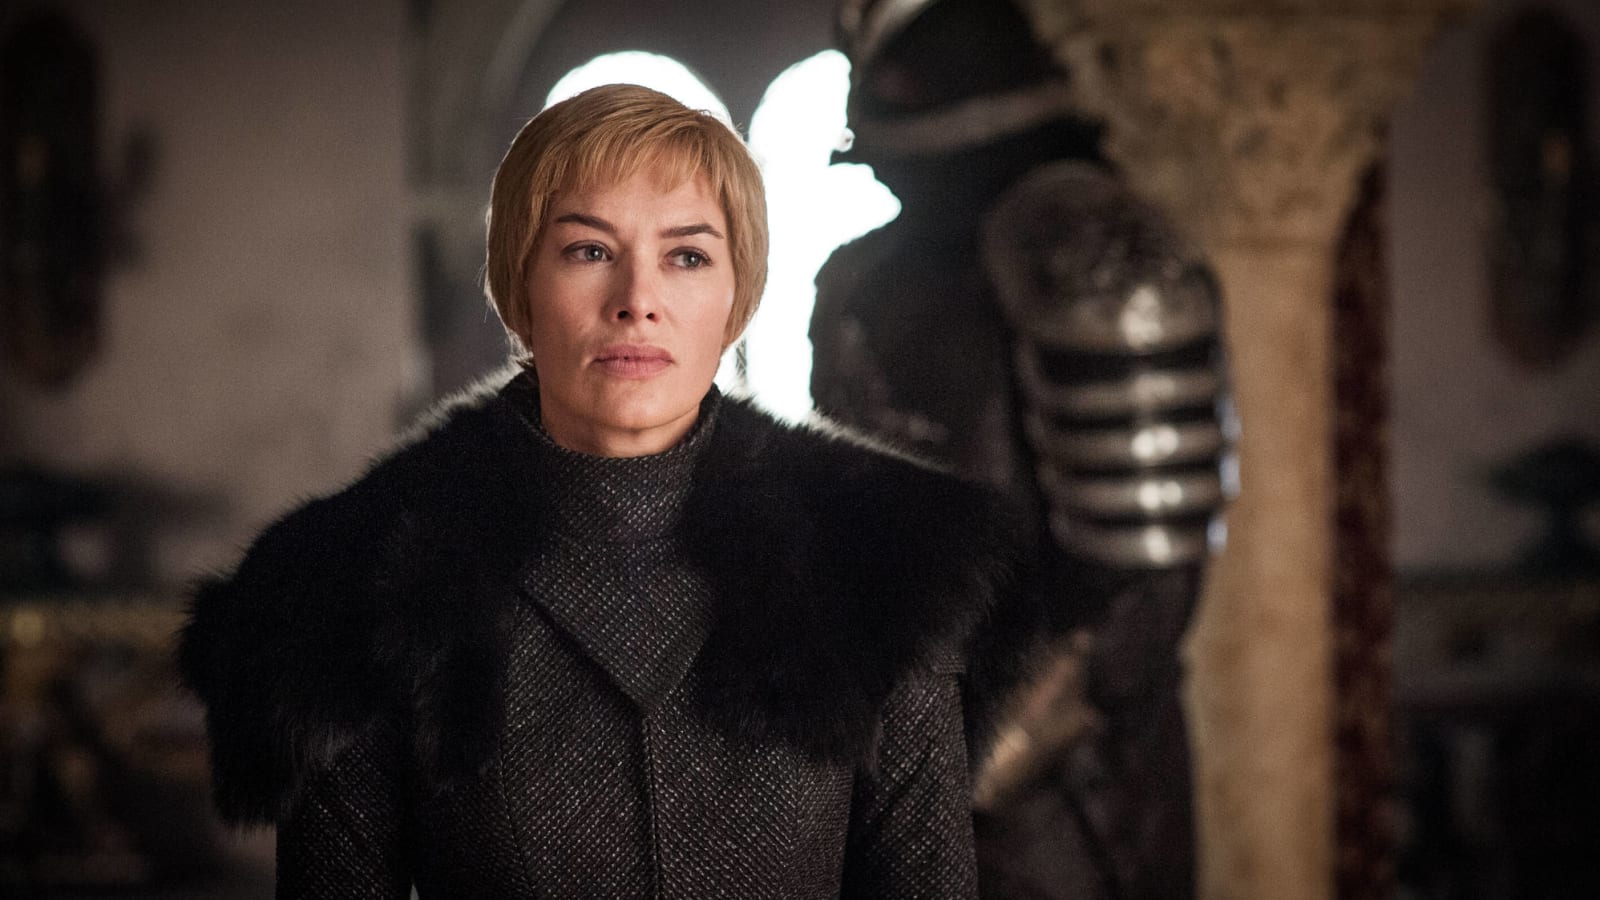 Lena Headey supports Hannah Waddingham over ‘Game of Thrones’ waterboarding scene